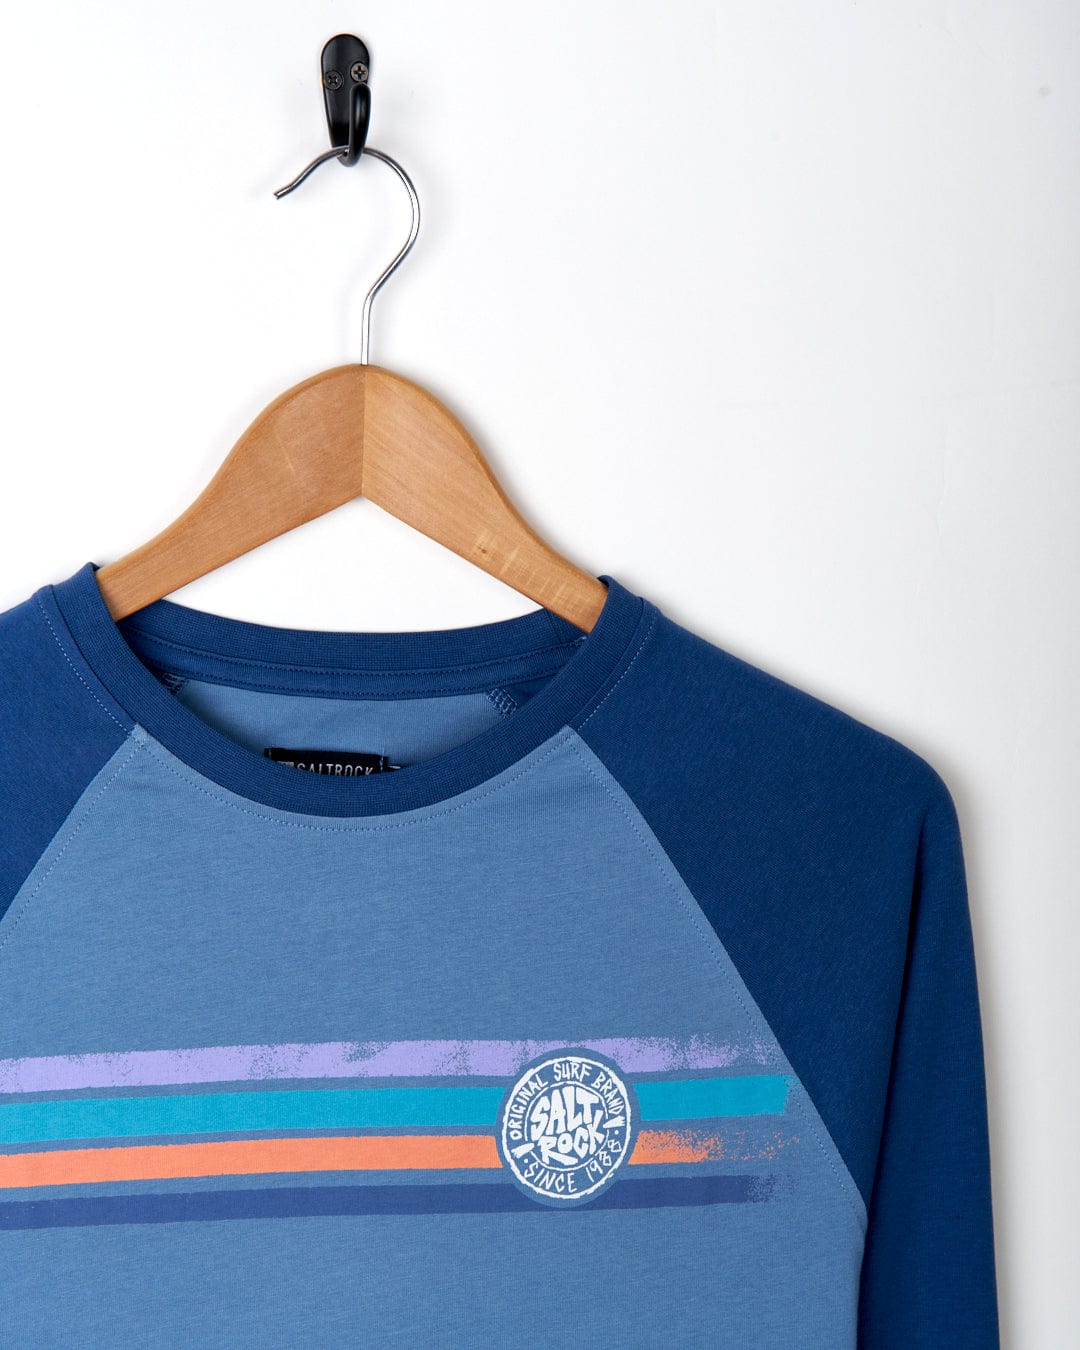 A cotton raglan t-shirt with an orange and blue stripe from Saltrock.